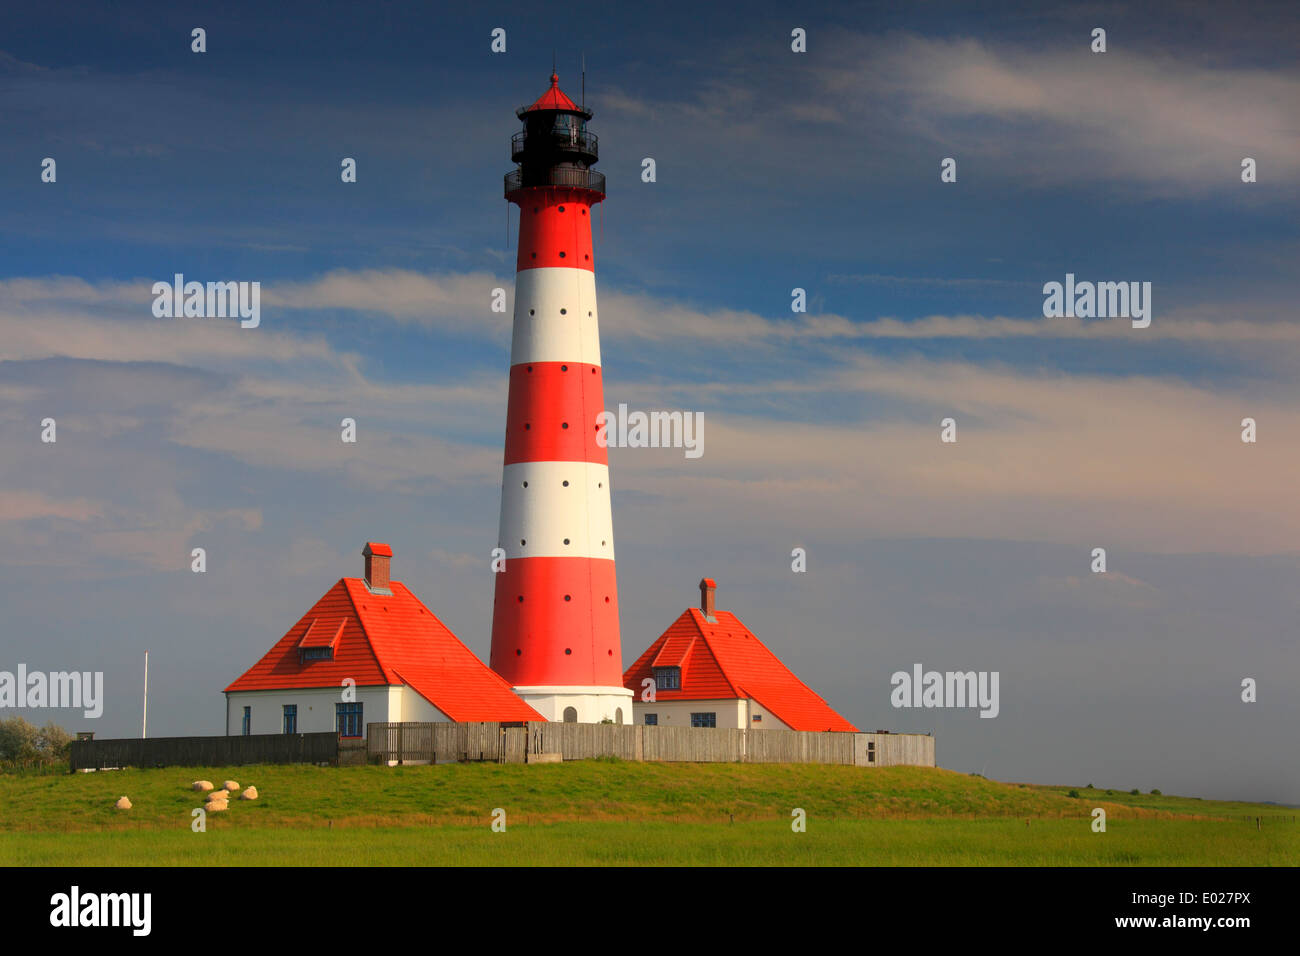 Red white stock photography and images - Alamy